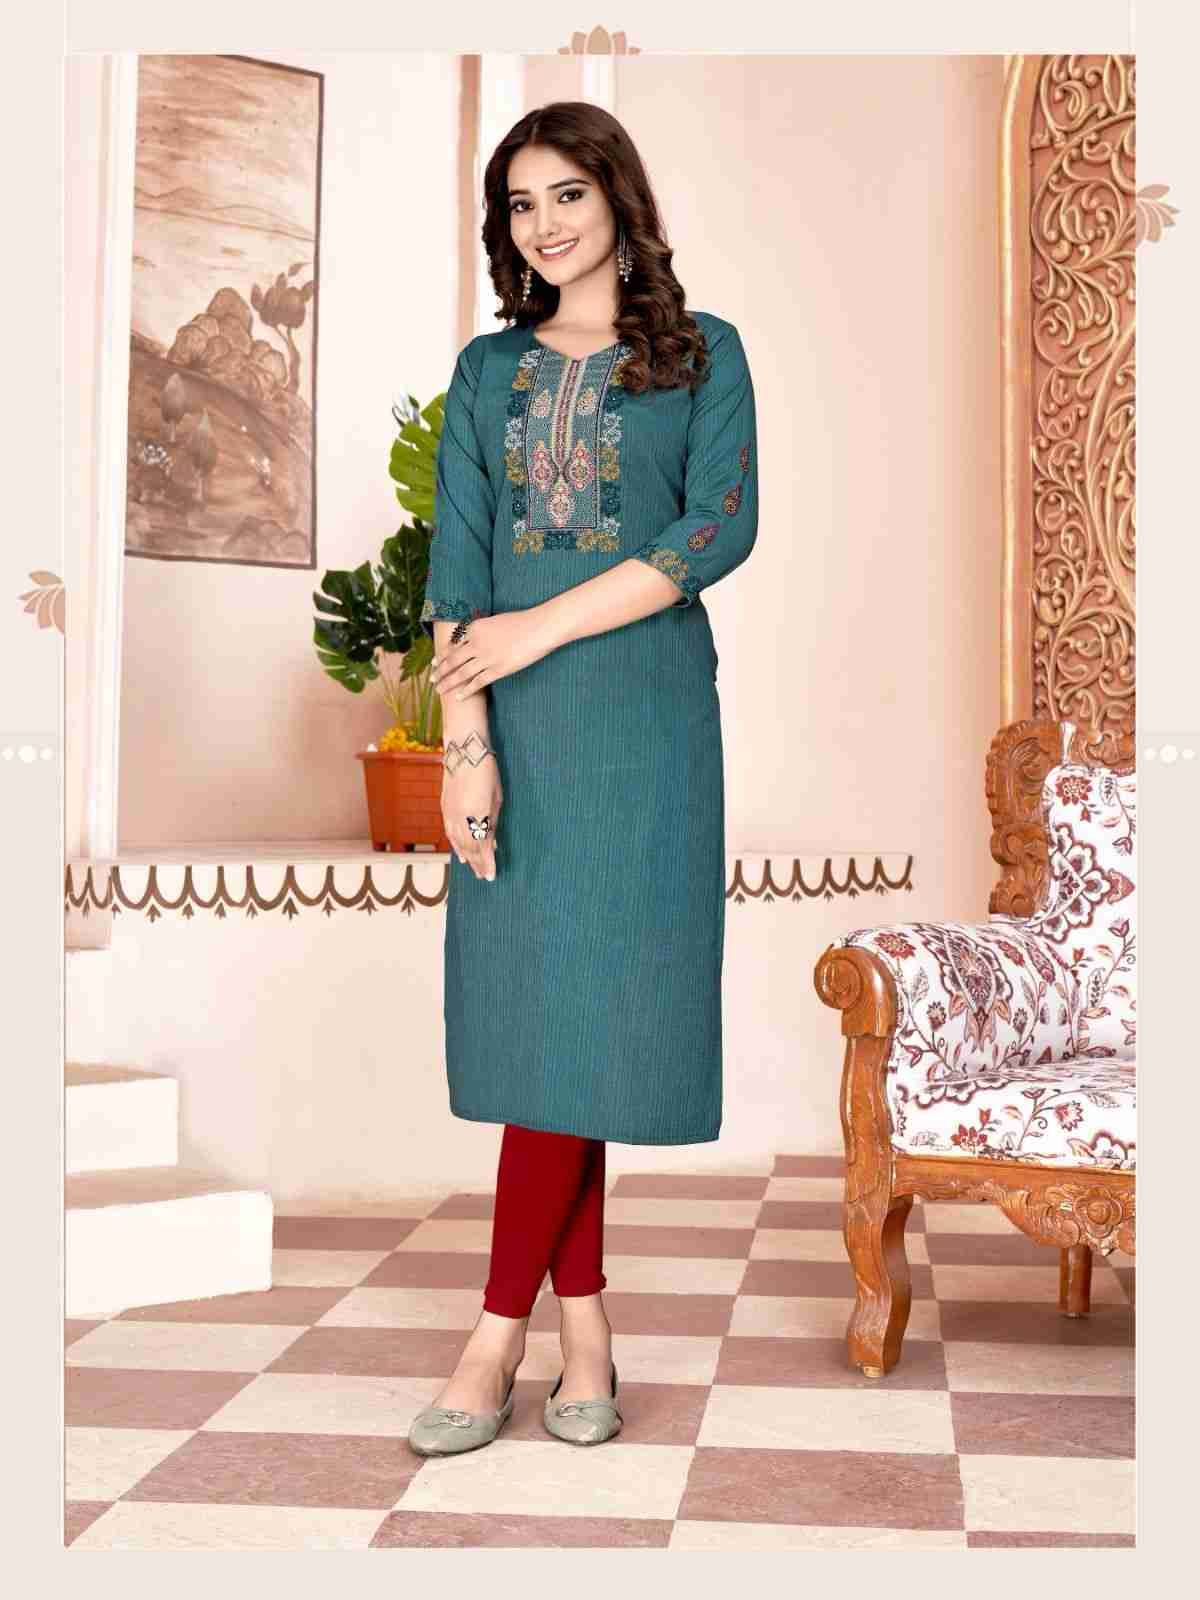 Kit Kat Vol-4 By Colourpix 4001 To 4006 Series Designer Stylish Fancy Colorful Beautiful Party Wear & Ethnic Wear Collection Rayon Embroidered Kurtis At Wholesale Price